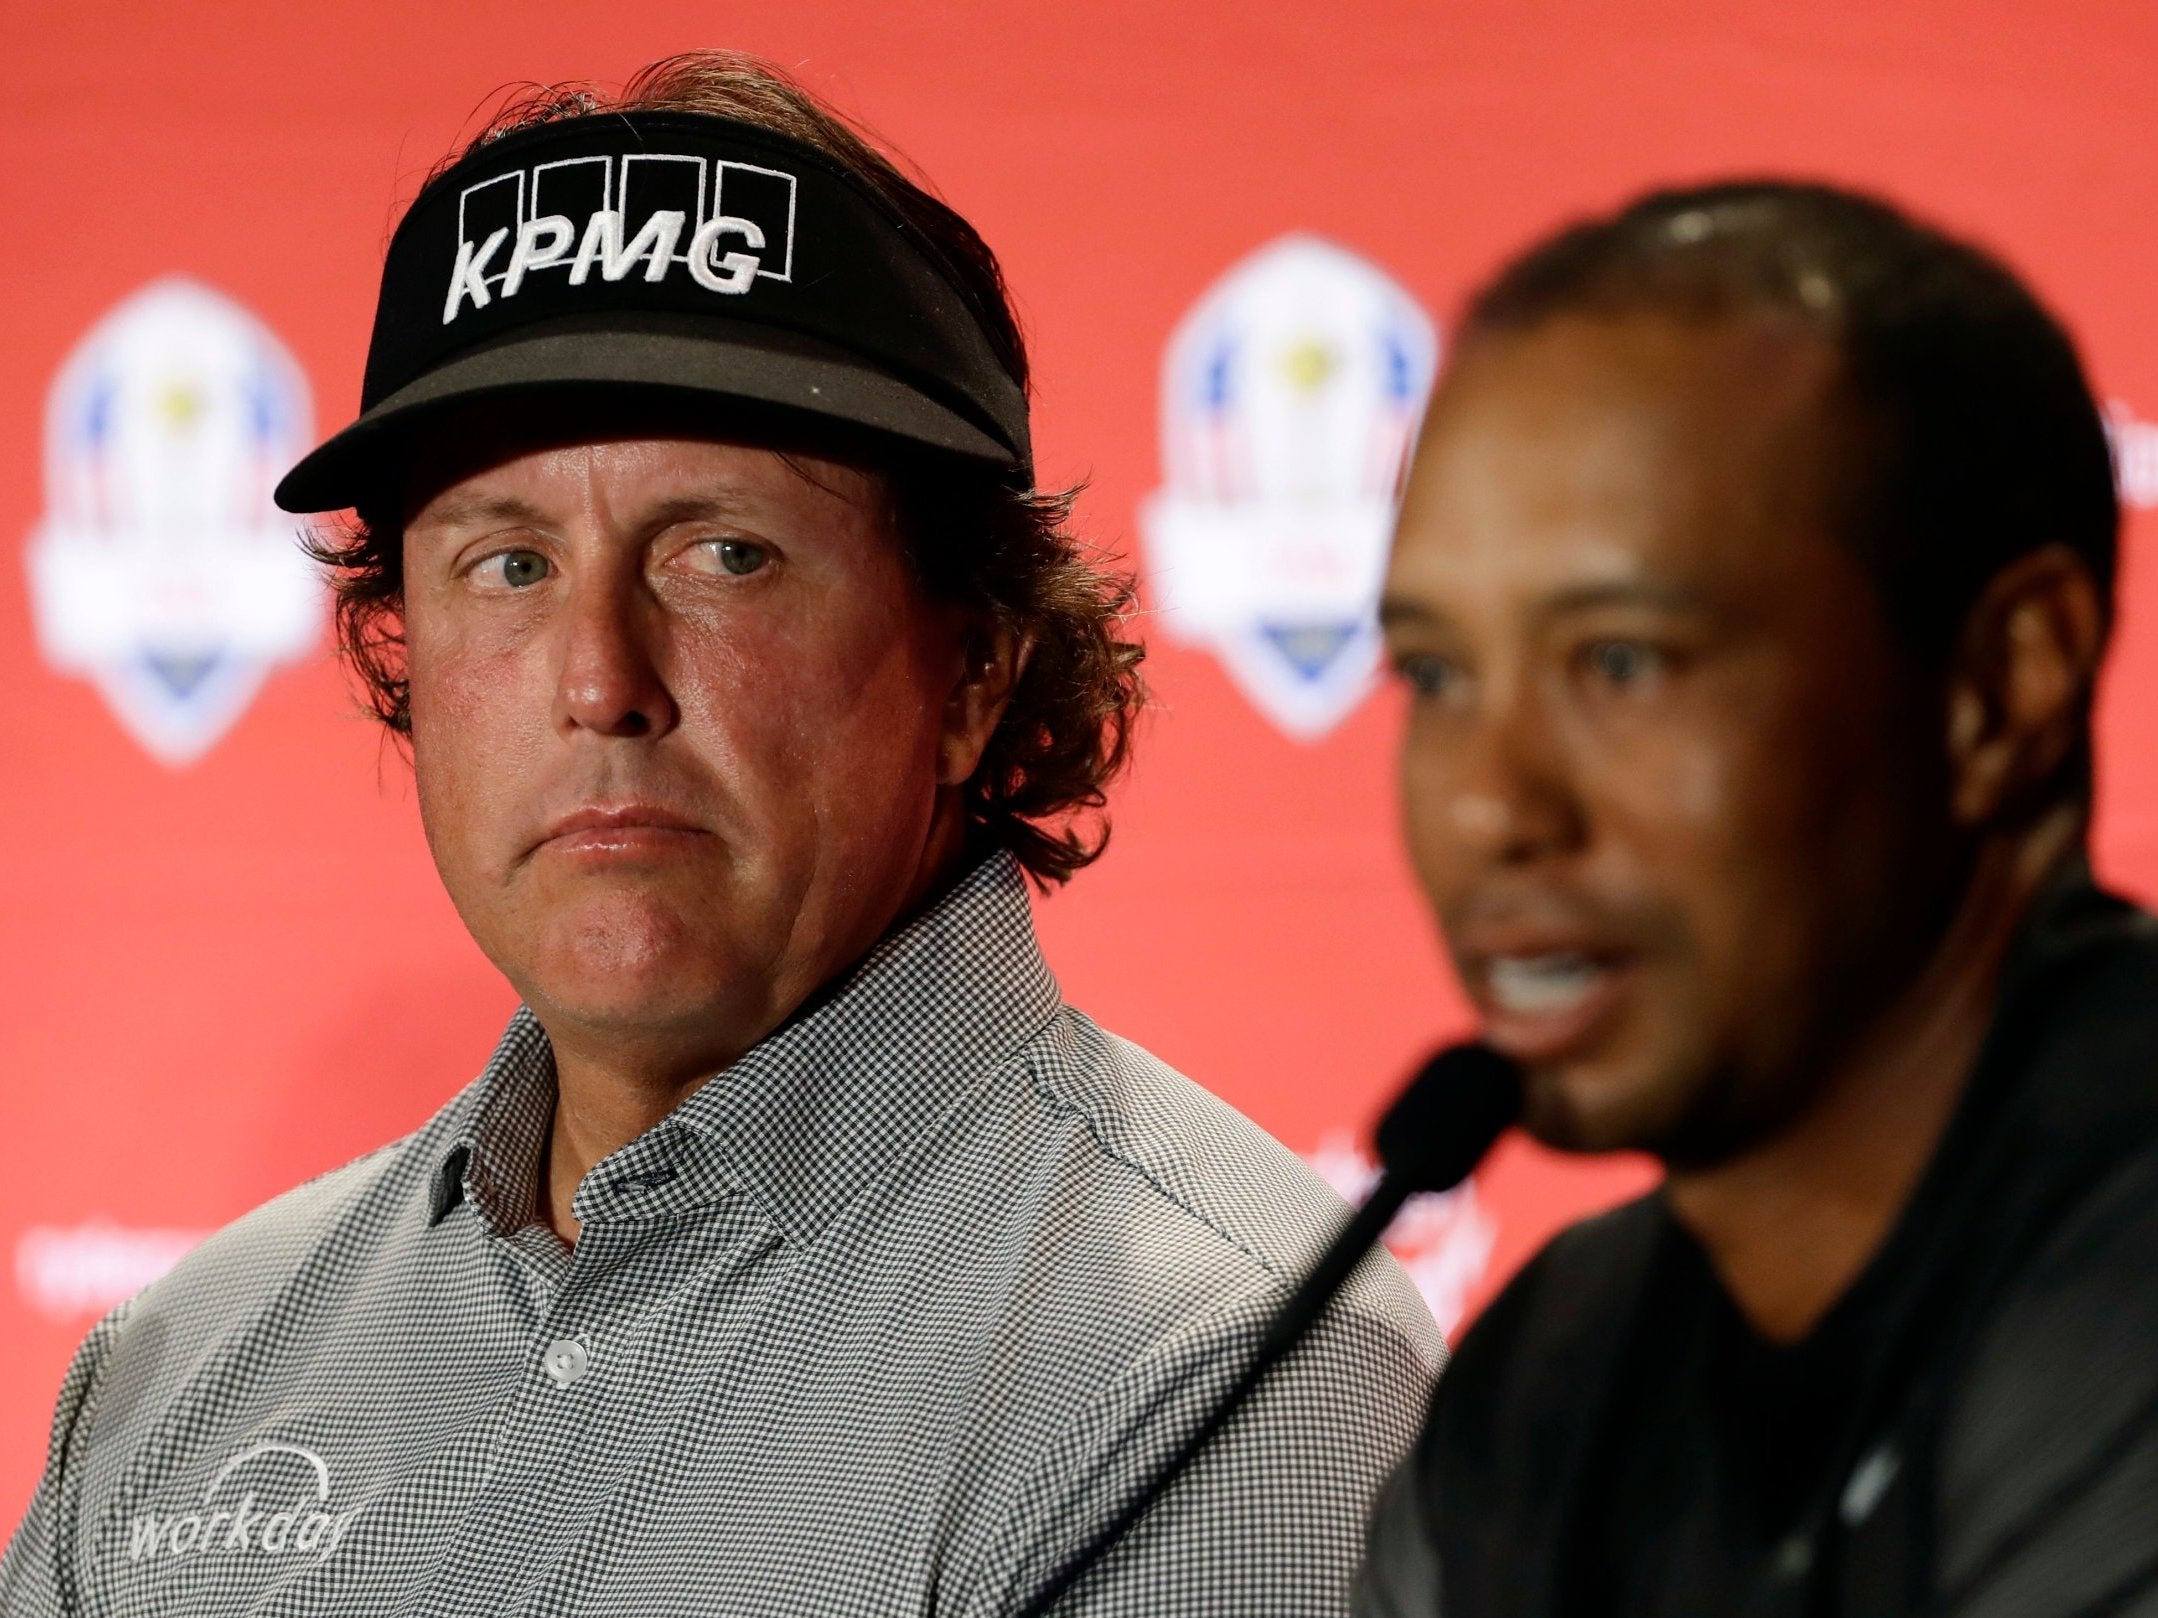 Phil Mickelson has also been picked after failing to qualify for the Ryder Cup